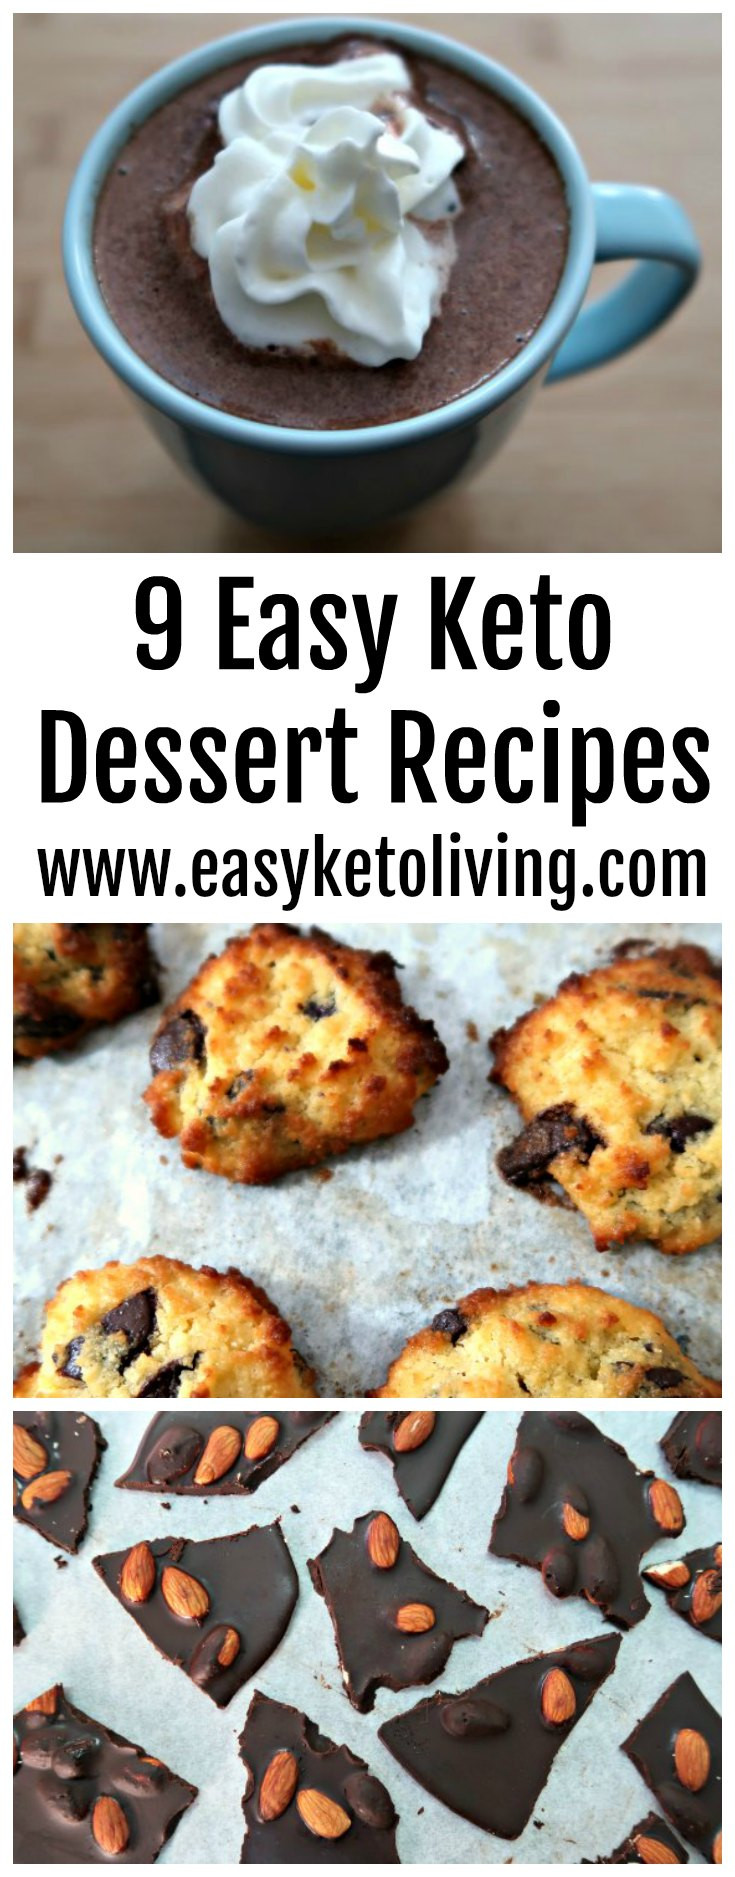 Easy Keto Dessert Recipes
 9 Easy Keto Dessert Recipes Quick Low Carb Ketogenic